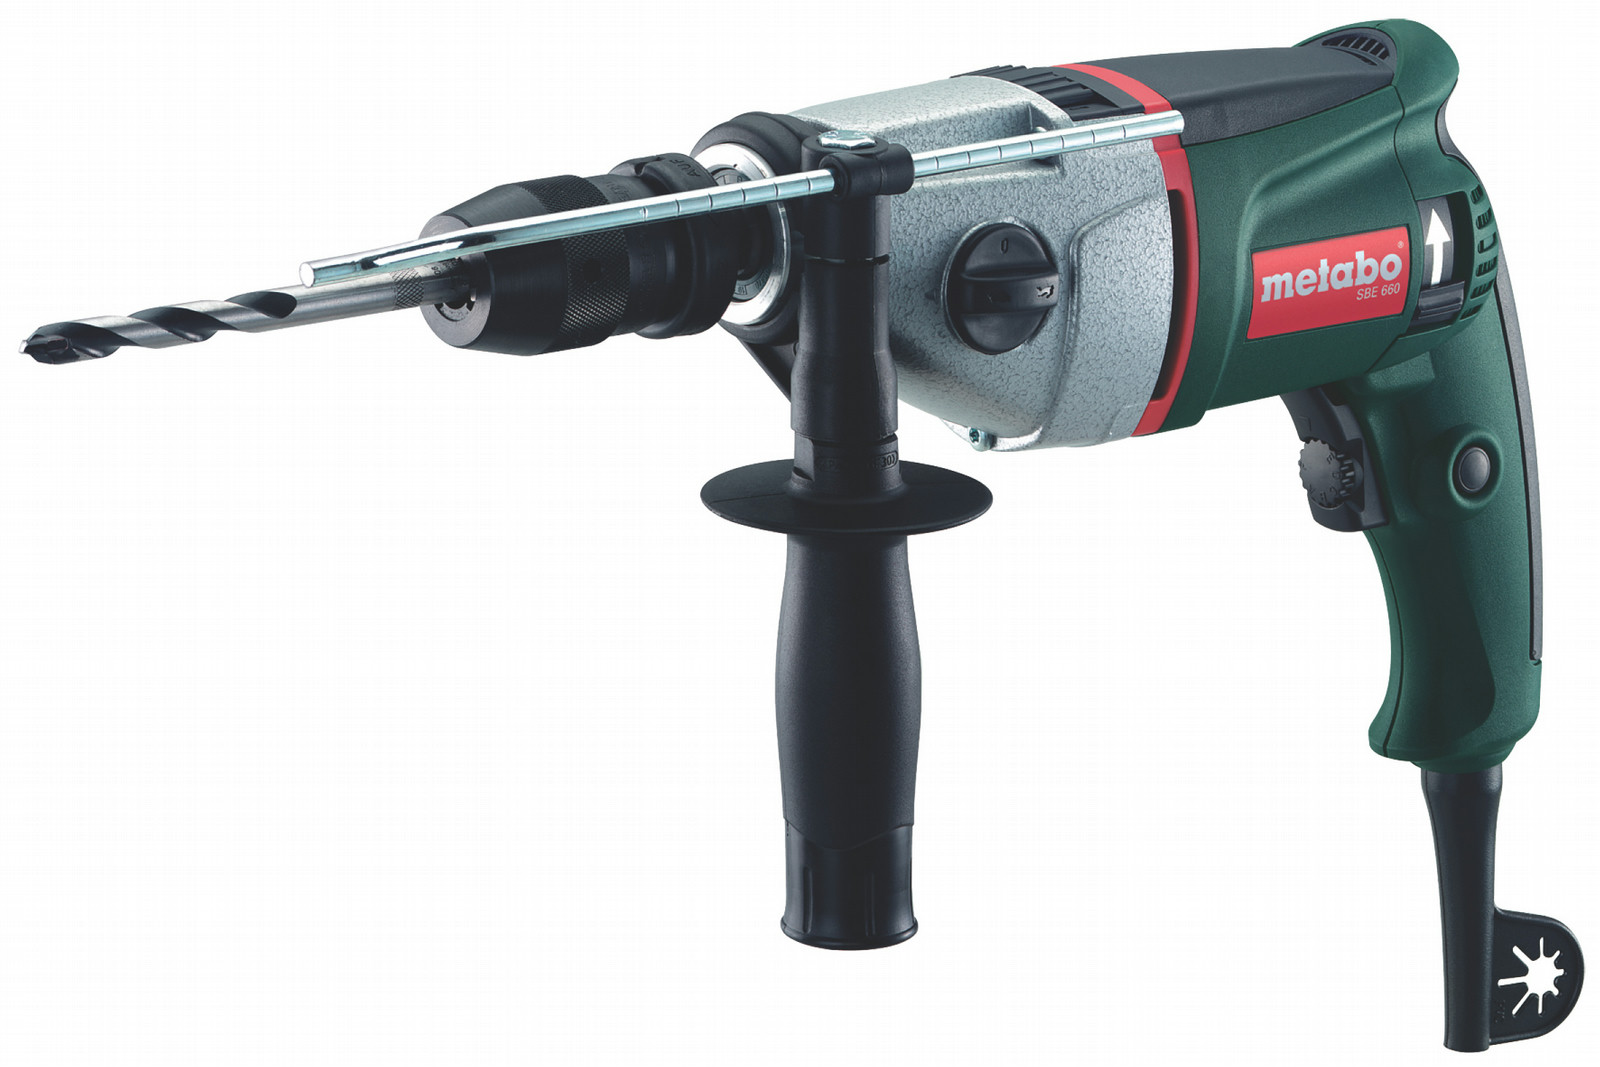 Image of Metabo SBE 660 impact drill Best Buy